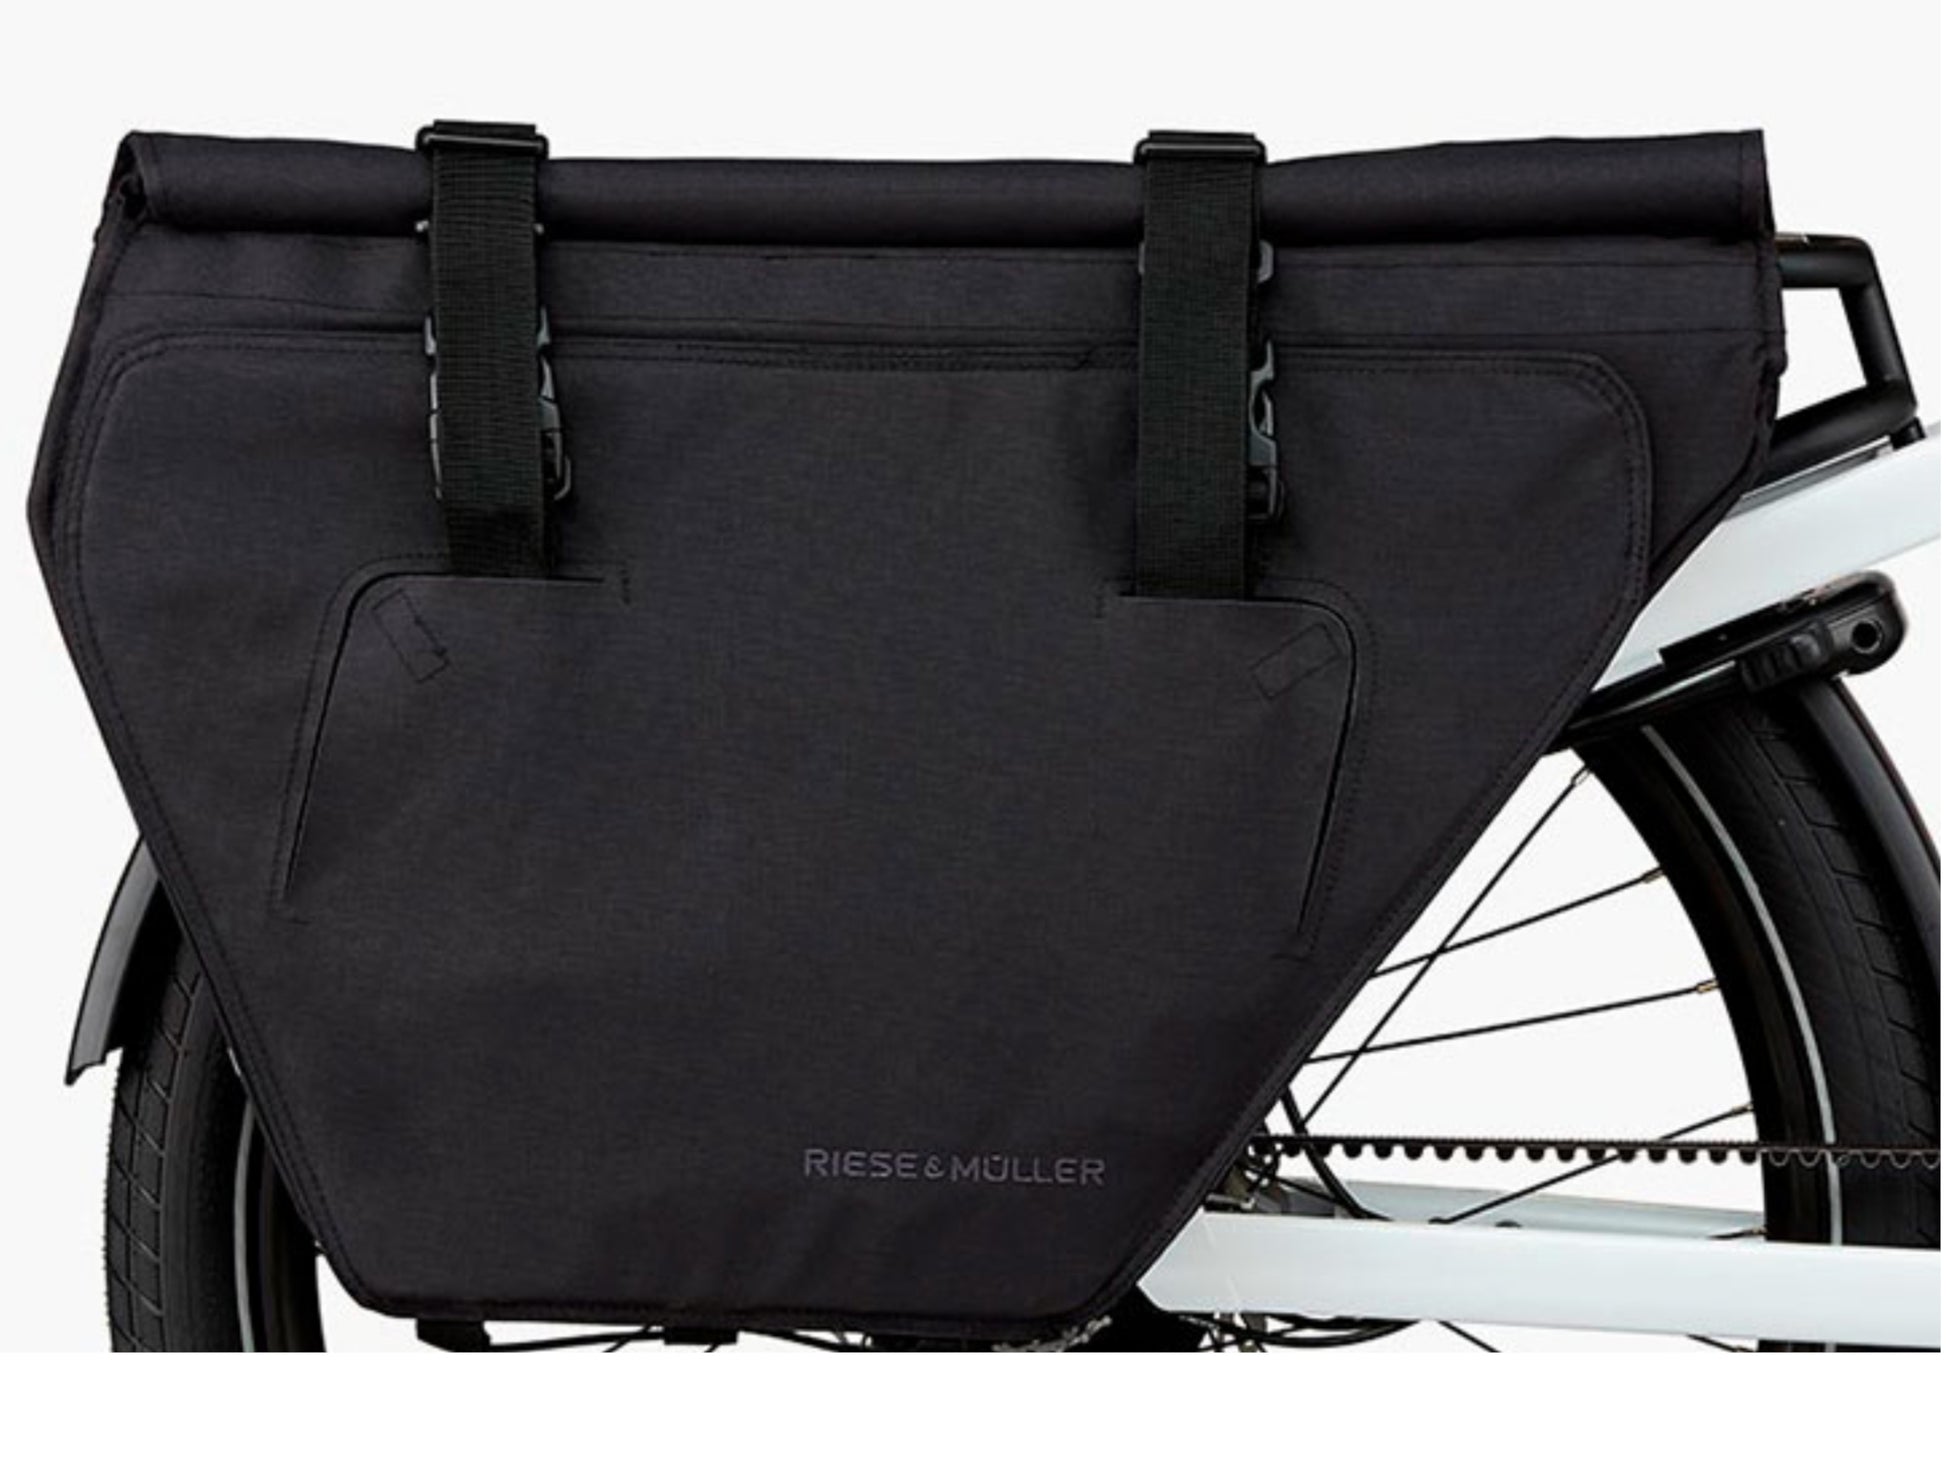 Riese and Muller Multicharger Mixte GT Rohloff HS emtb hardtail close up rear cargo bags